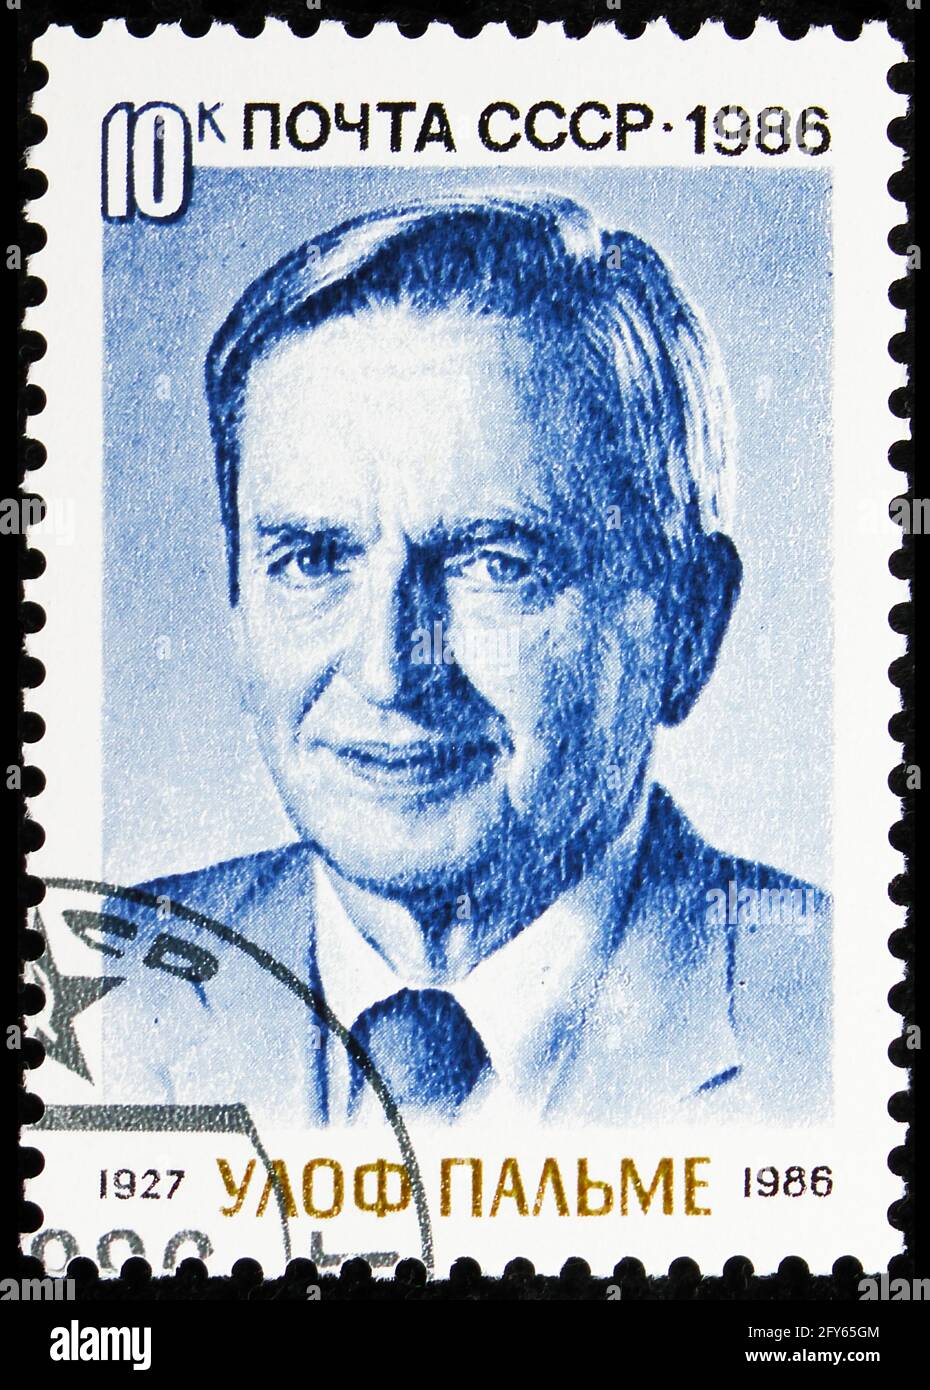 MOSCOW, RUSSIA - AUGUST 31, 2019: Postage stamp printed in Soviet Union (Russia) shows Olof Palme, Leaders serie, circa 1986 Stock Photo